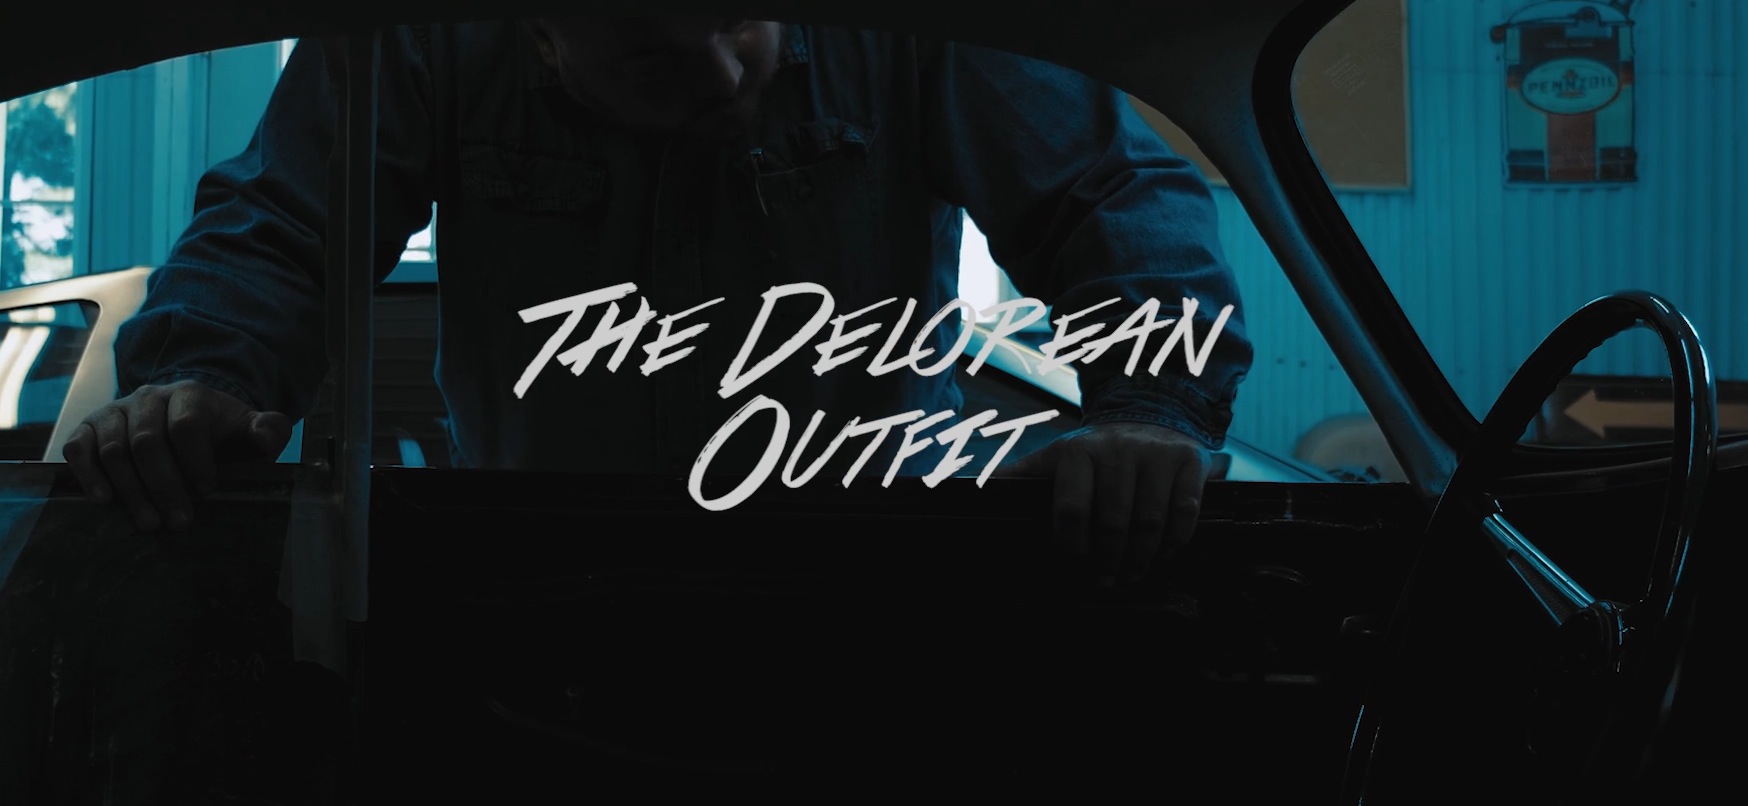 The Delorean Outfit6